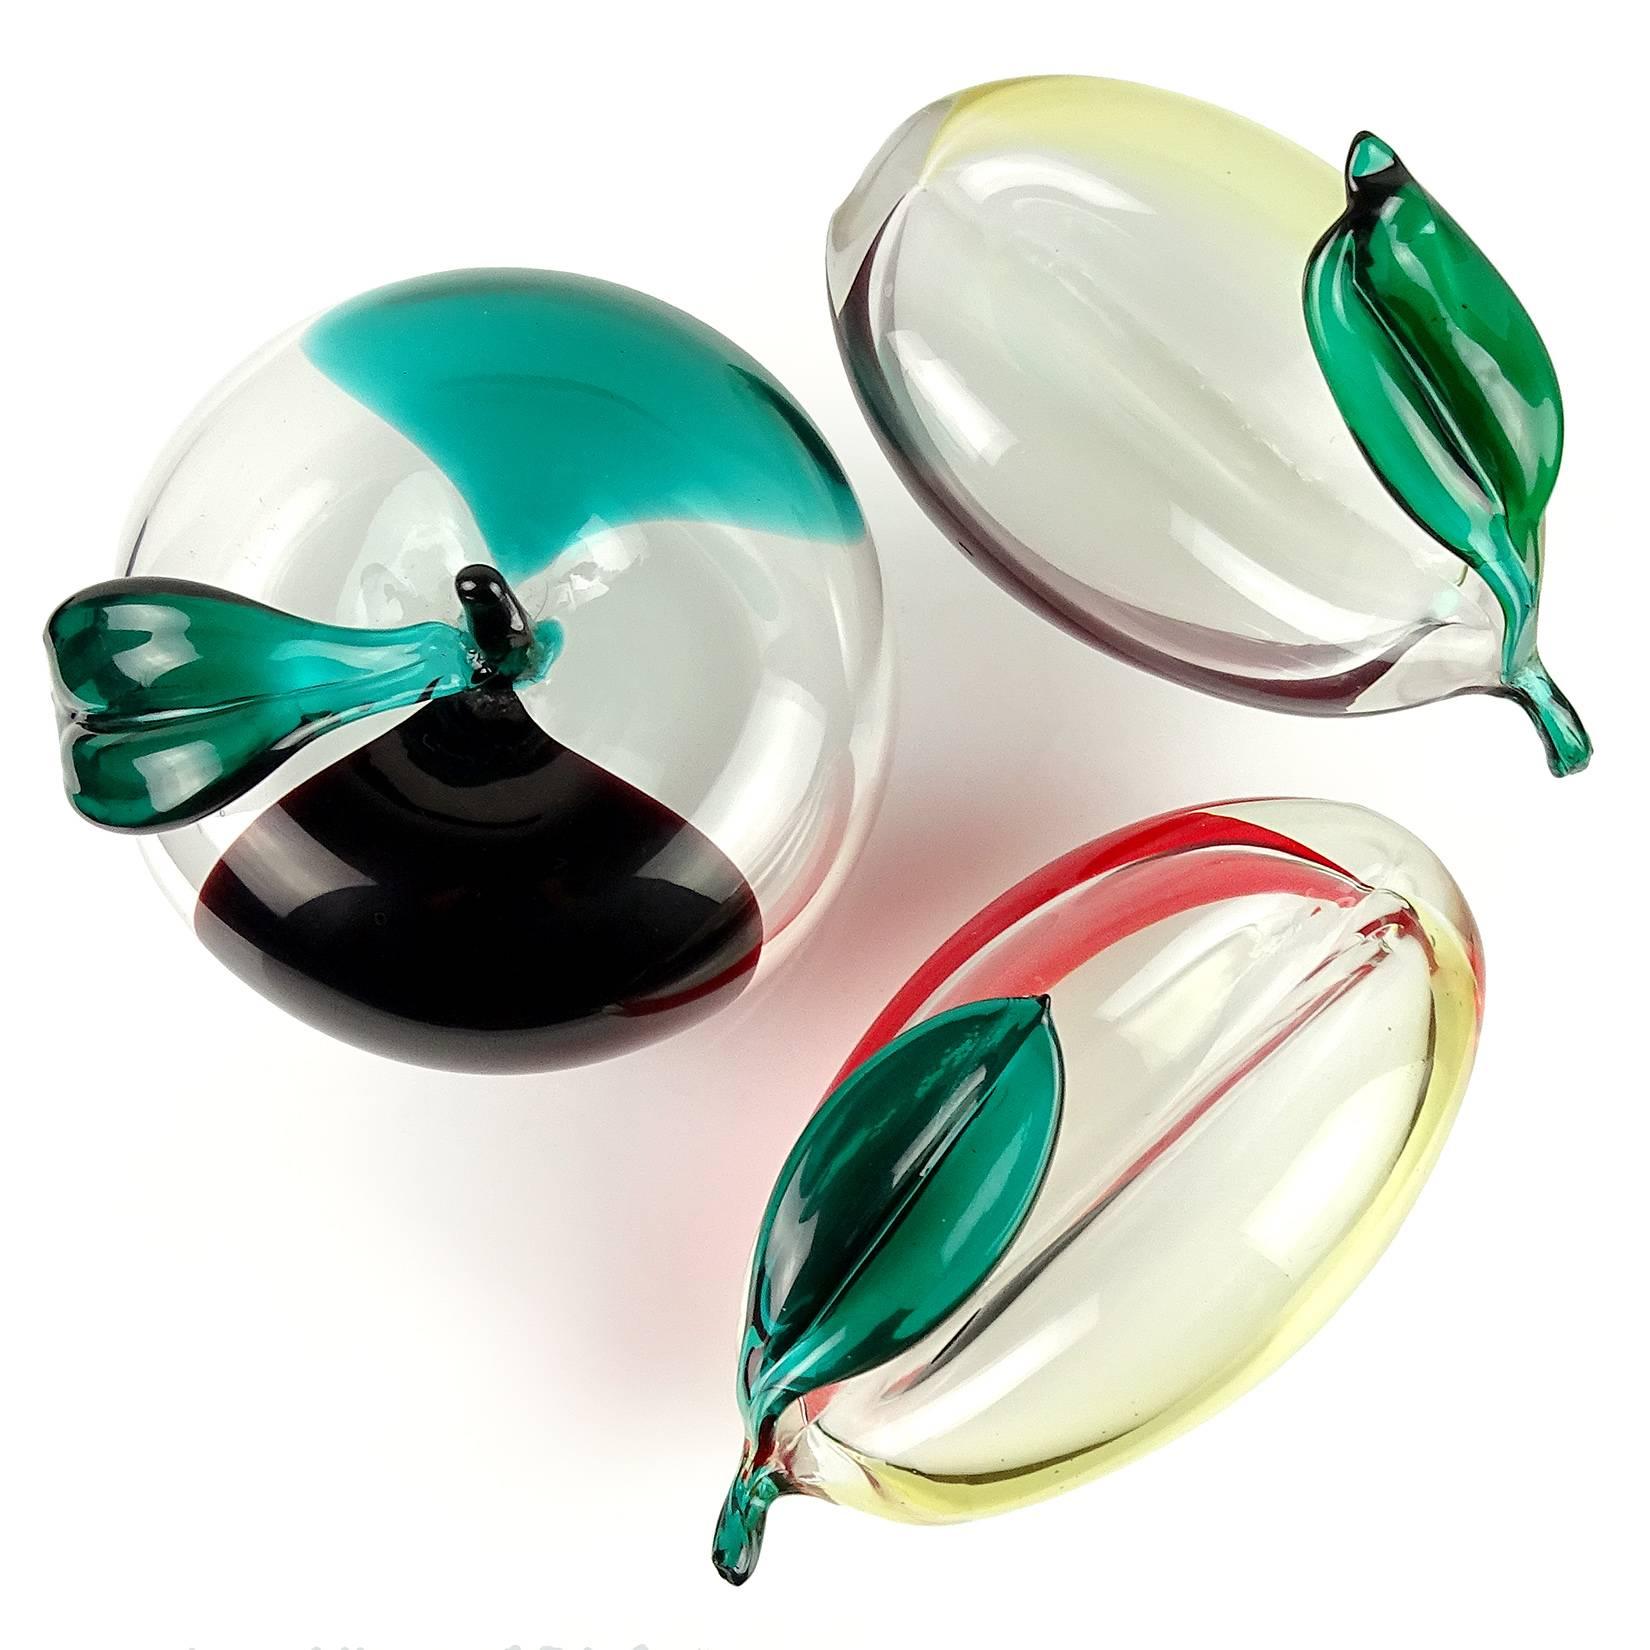 Gorgeous set of Murano hand blown black, green, red, yellow Italian art glass fruit sculptures. Documented to designer Fulvio Bianconi for Venini. There is an apple, and 2 other fruit pieces, with applied leafs in the "Macchie" design. One